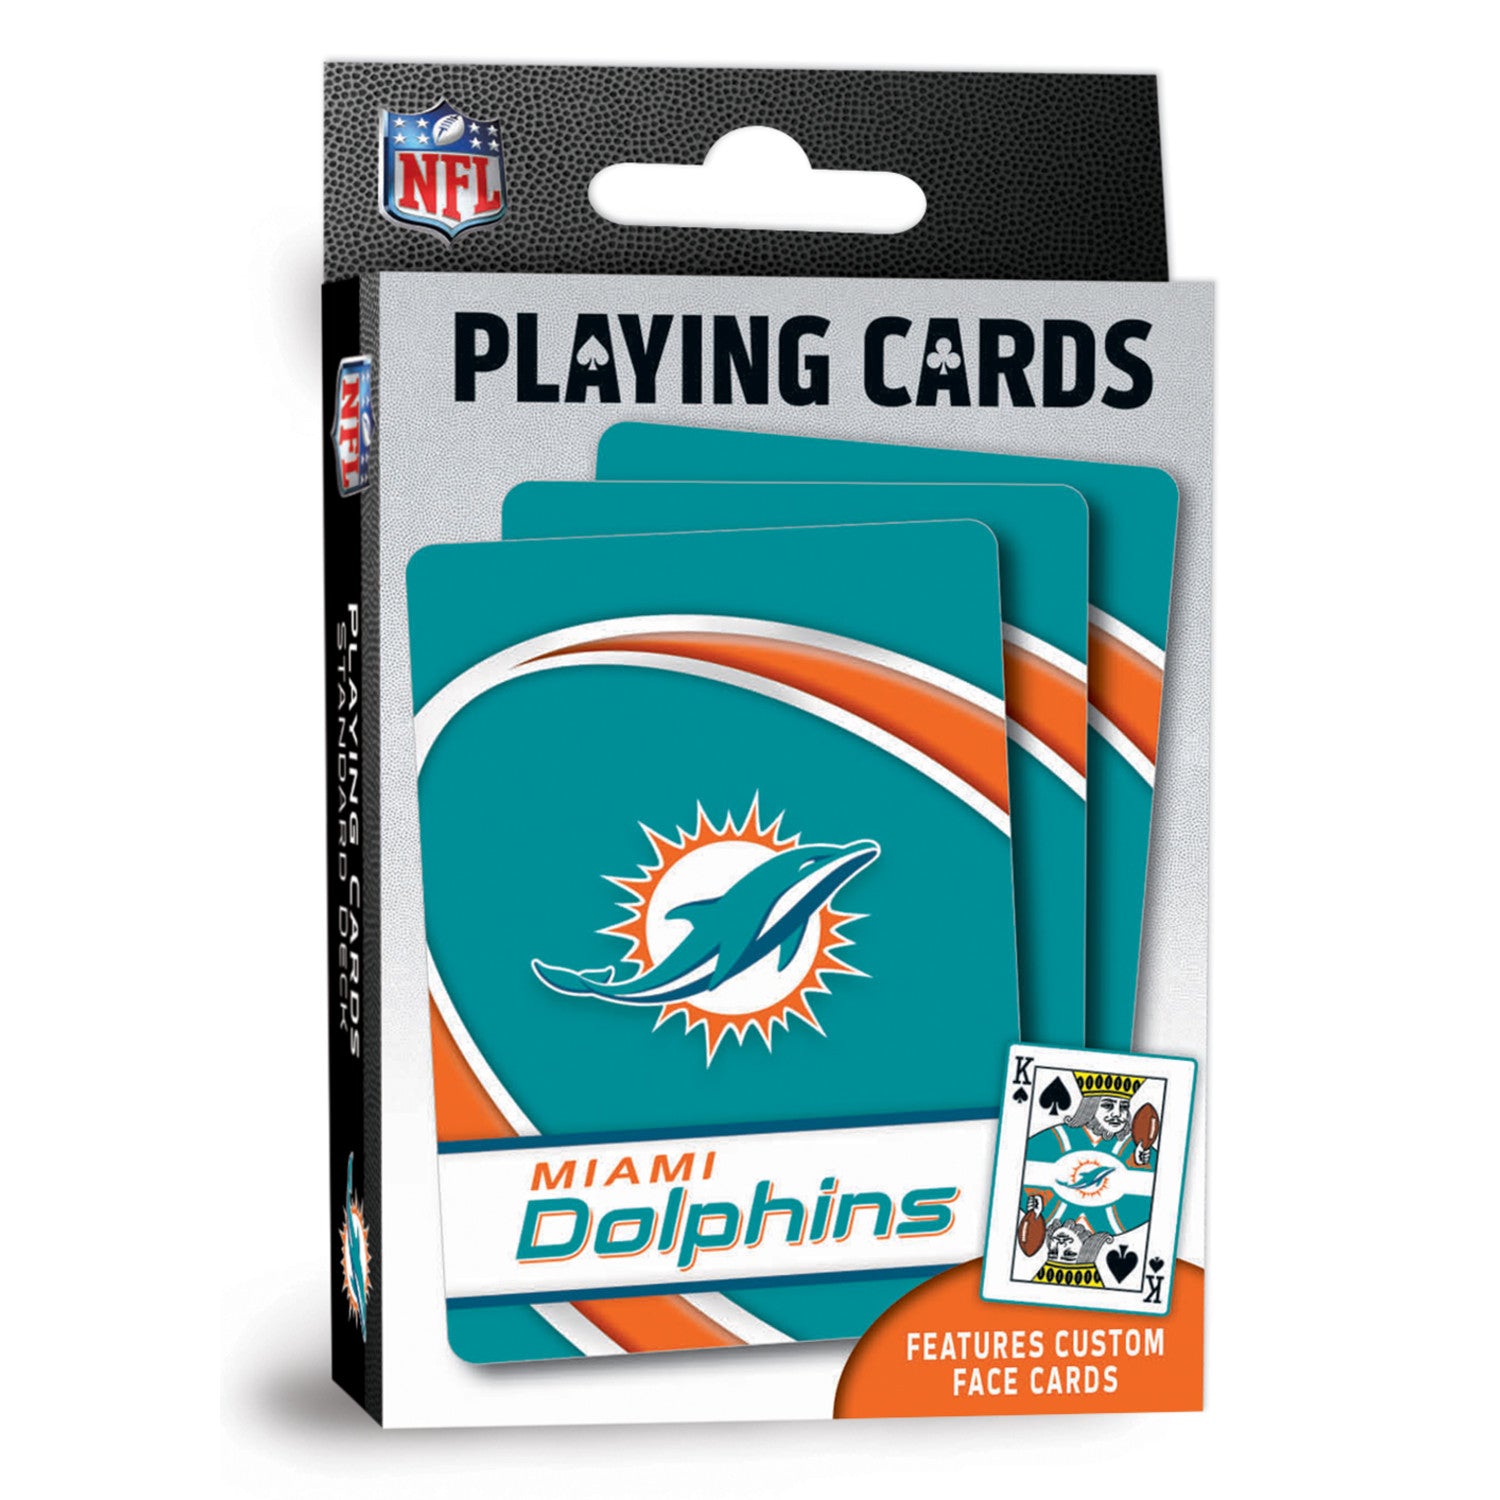 Miami Dolphins Playing Cards - 54 Card Deck